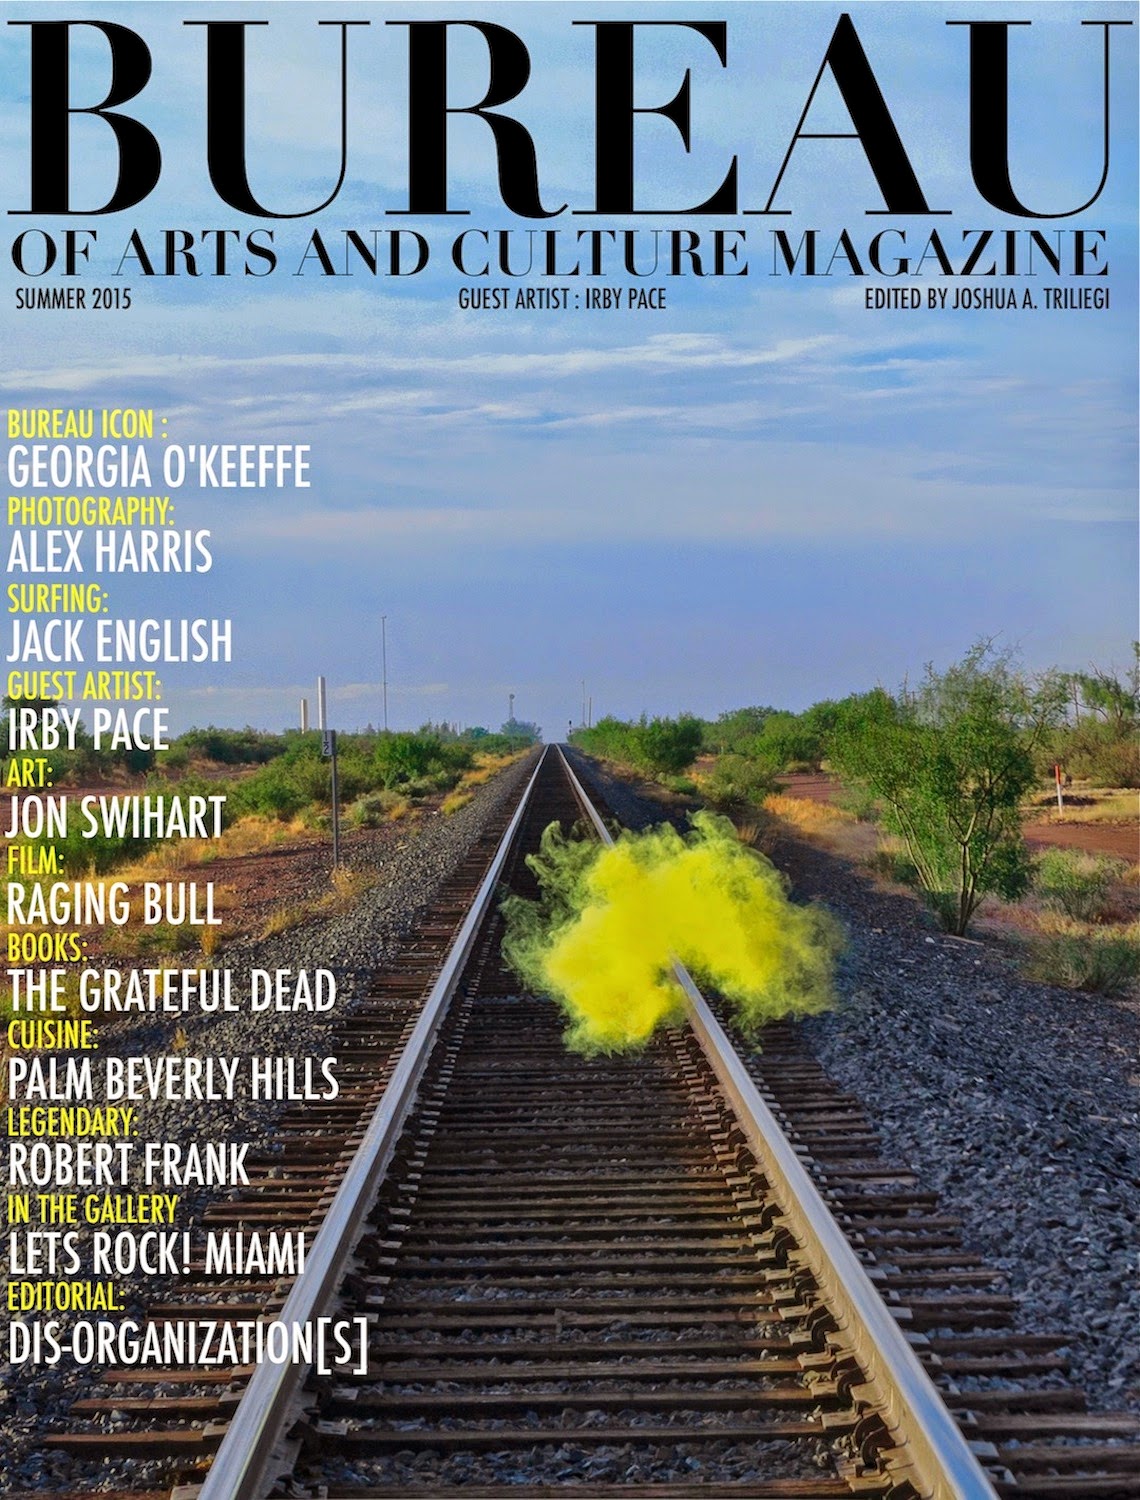 SUMMER 2015 EDITION TAP COVER FOR A FREE 200+ PAGE MAGAZINE